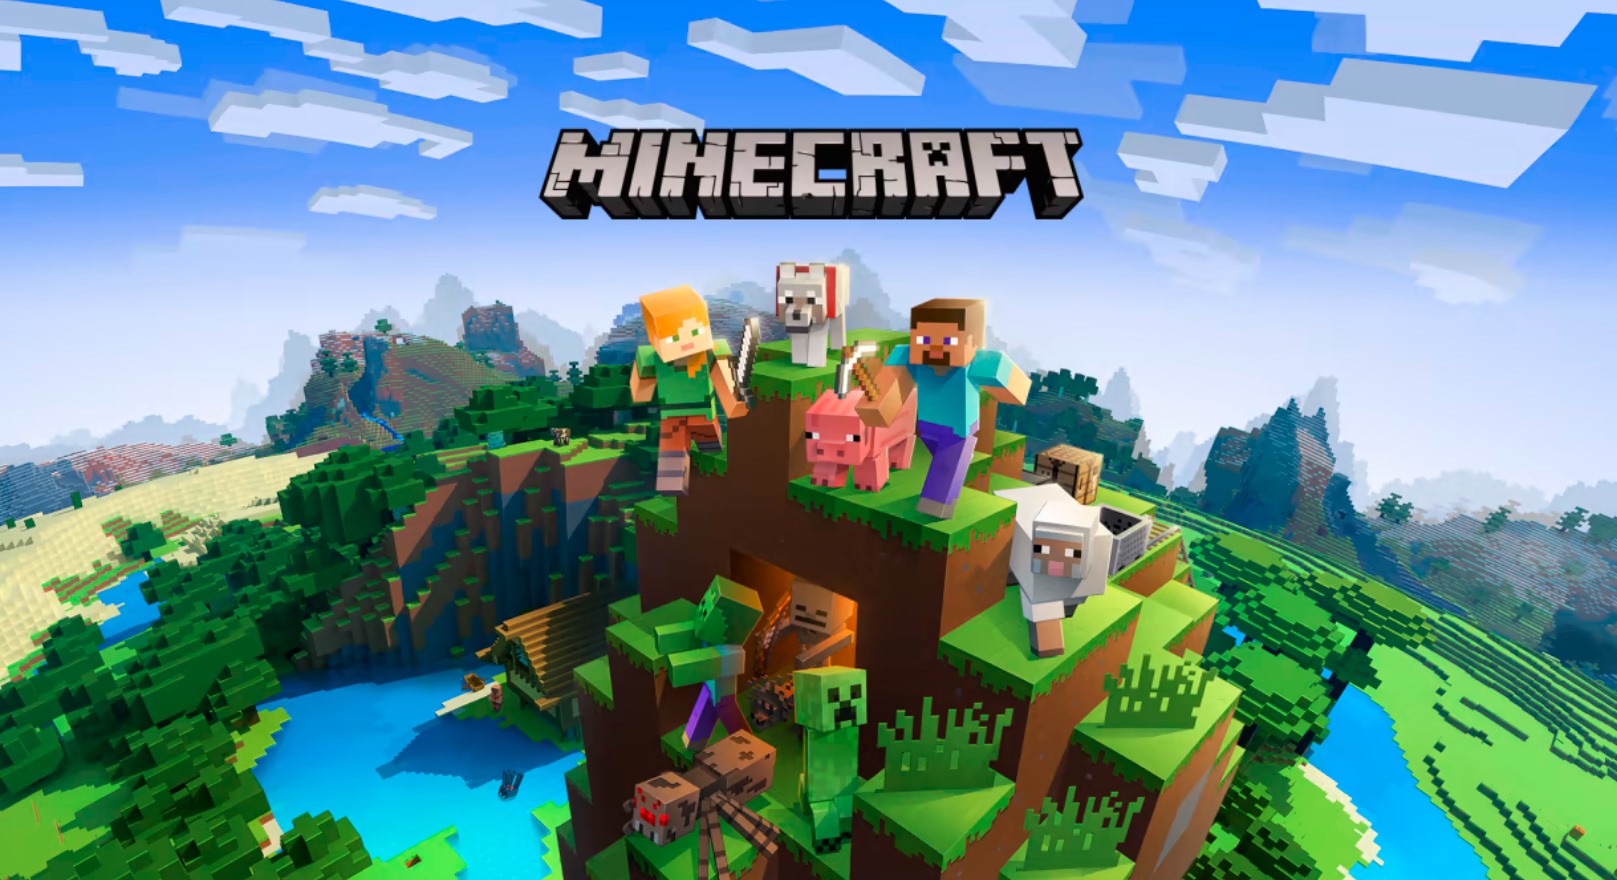 Is Minecraft No Longer An Indie Game Just Because It's Now Owned By A Big Studio